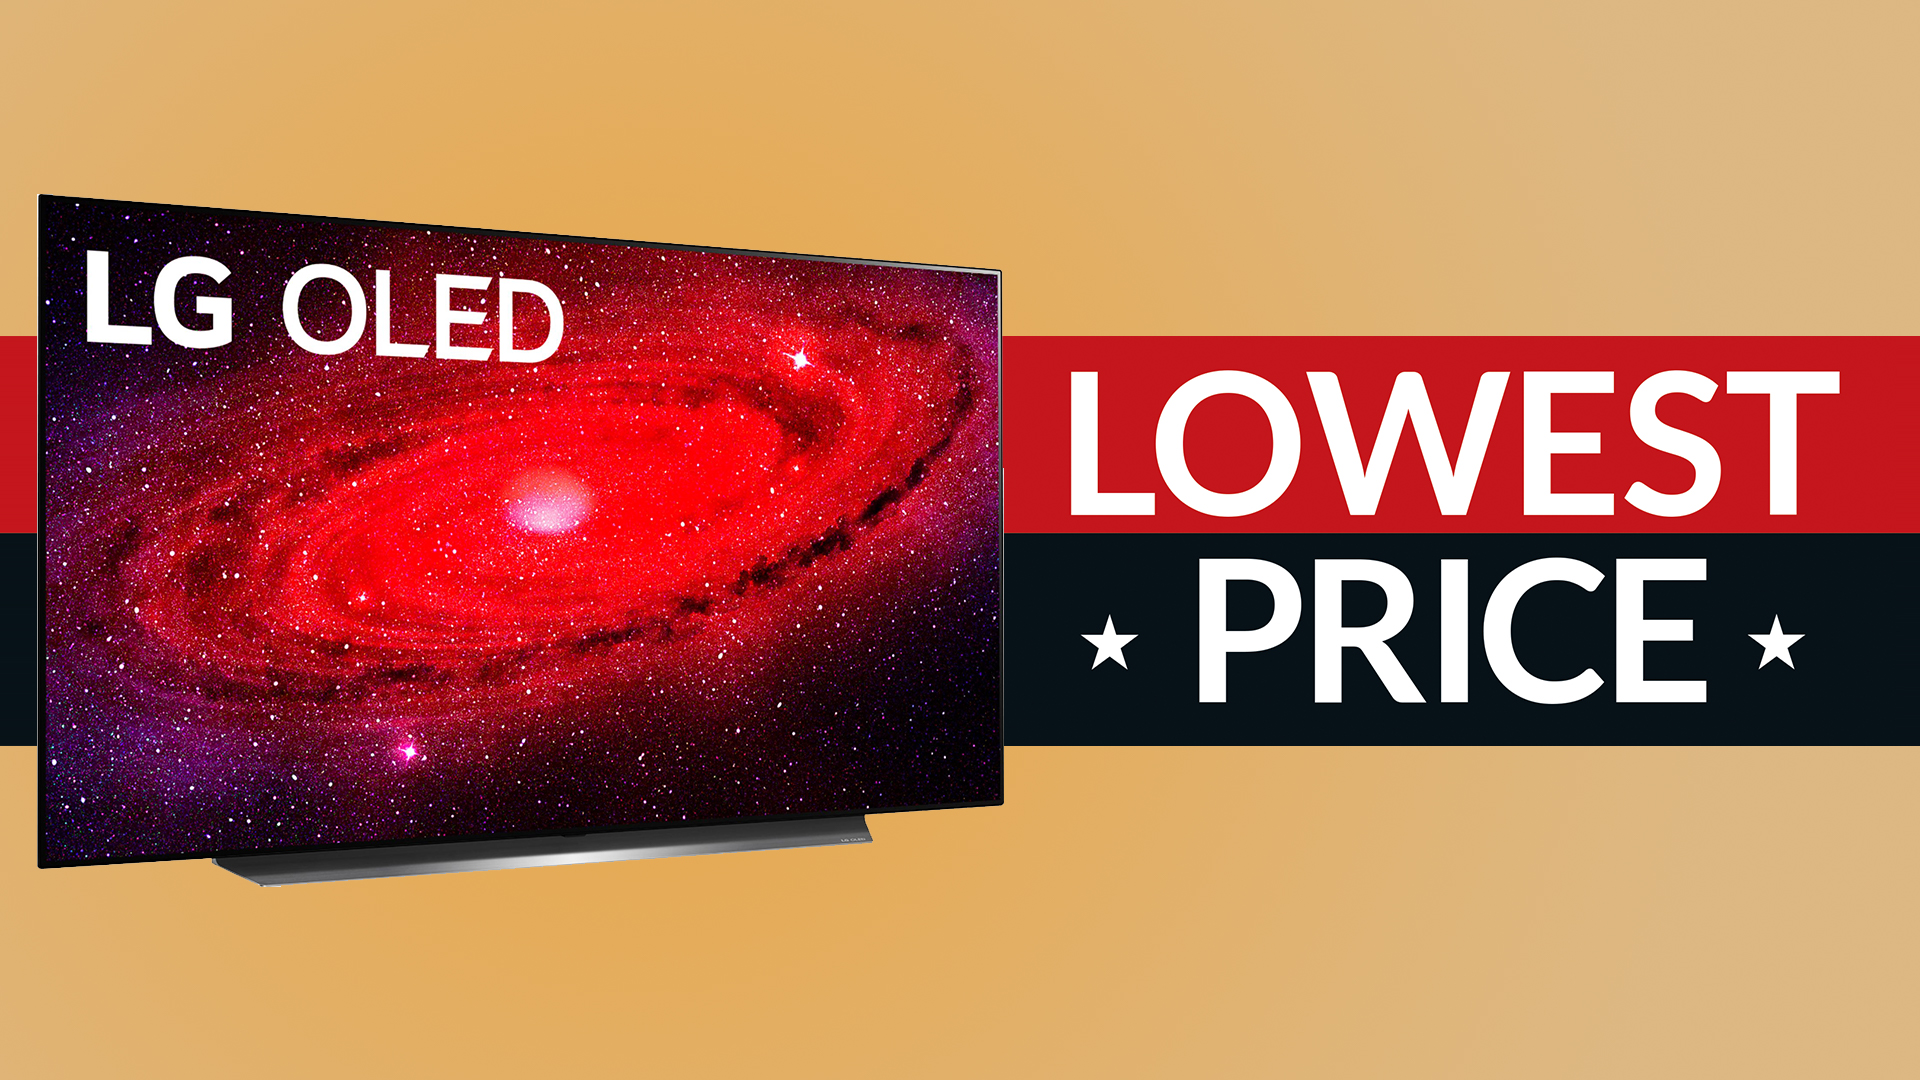 LG OLED TV price drop The LG CX and BX are cheaper than EVER before